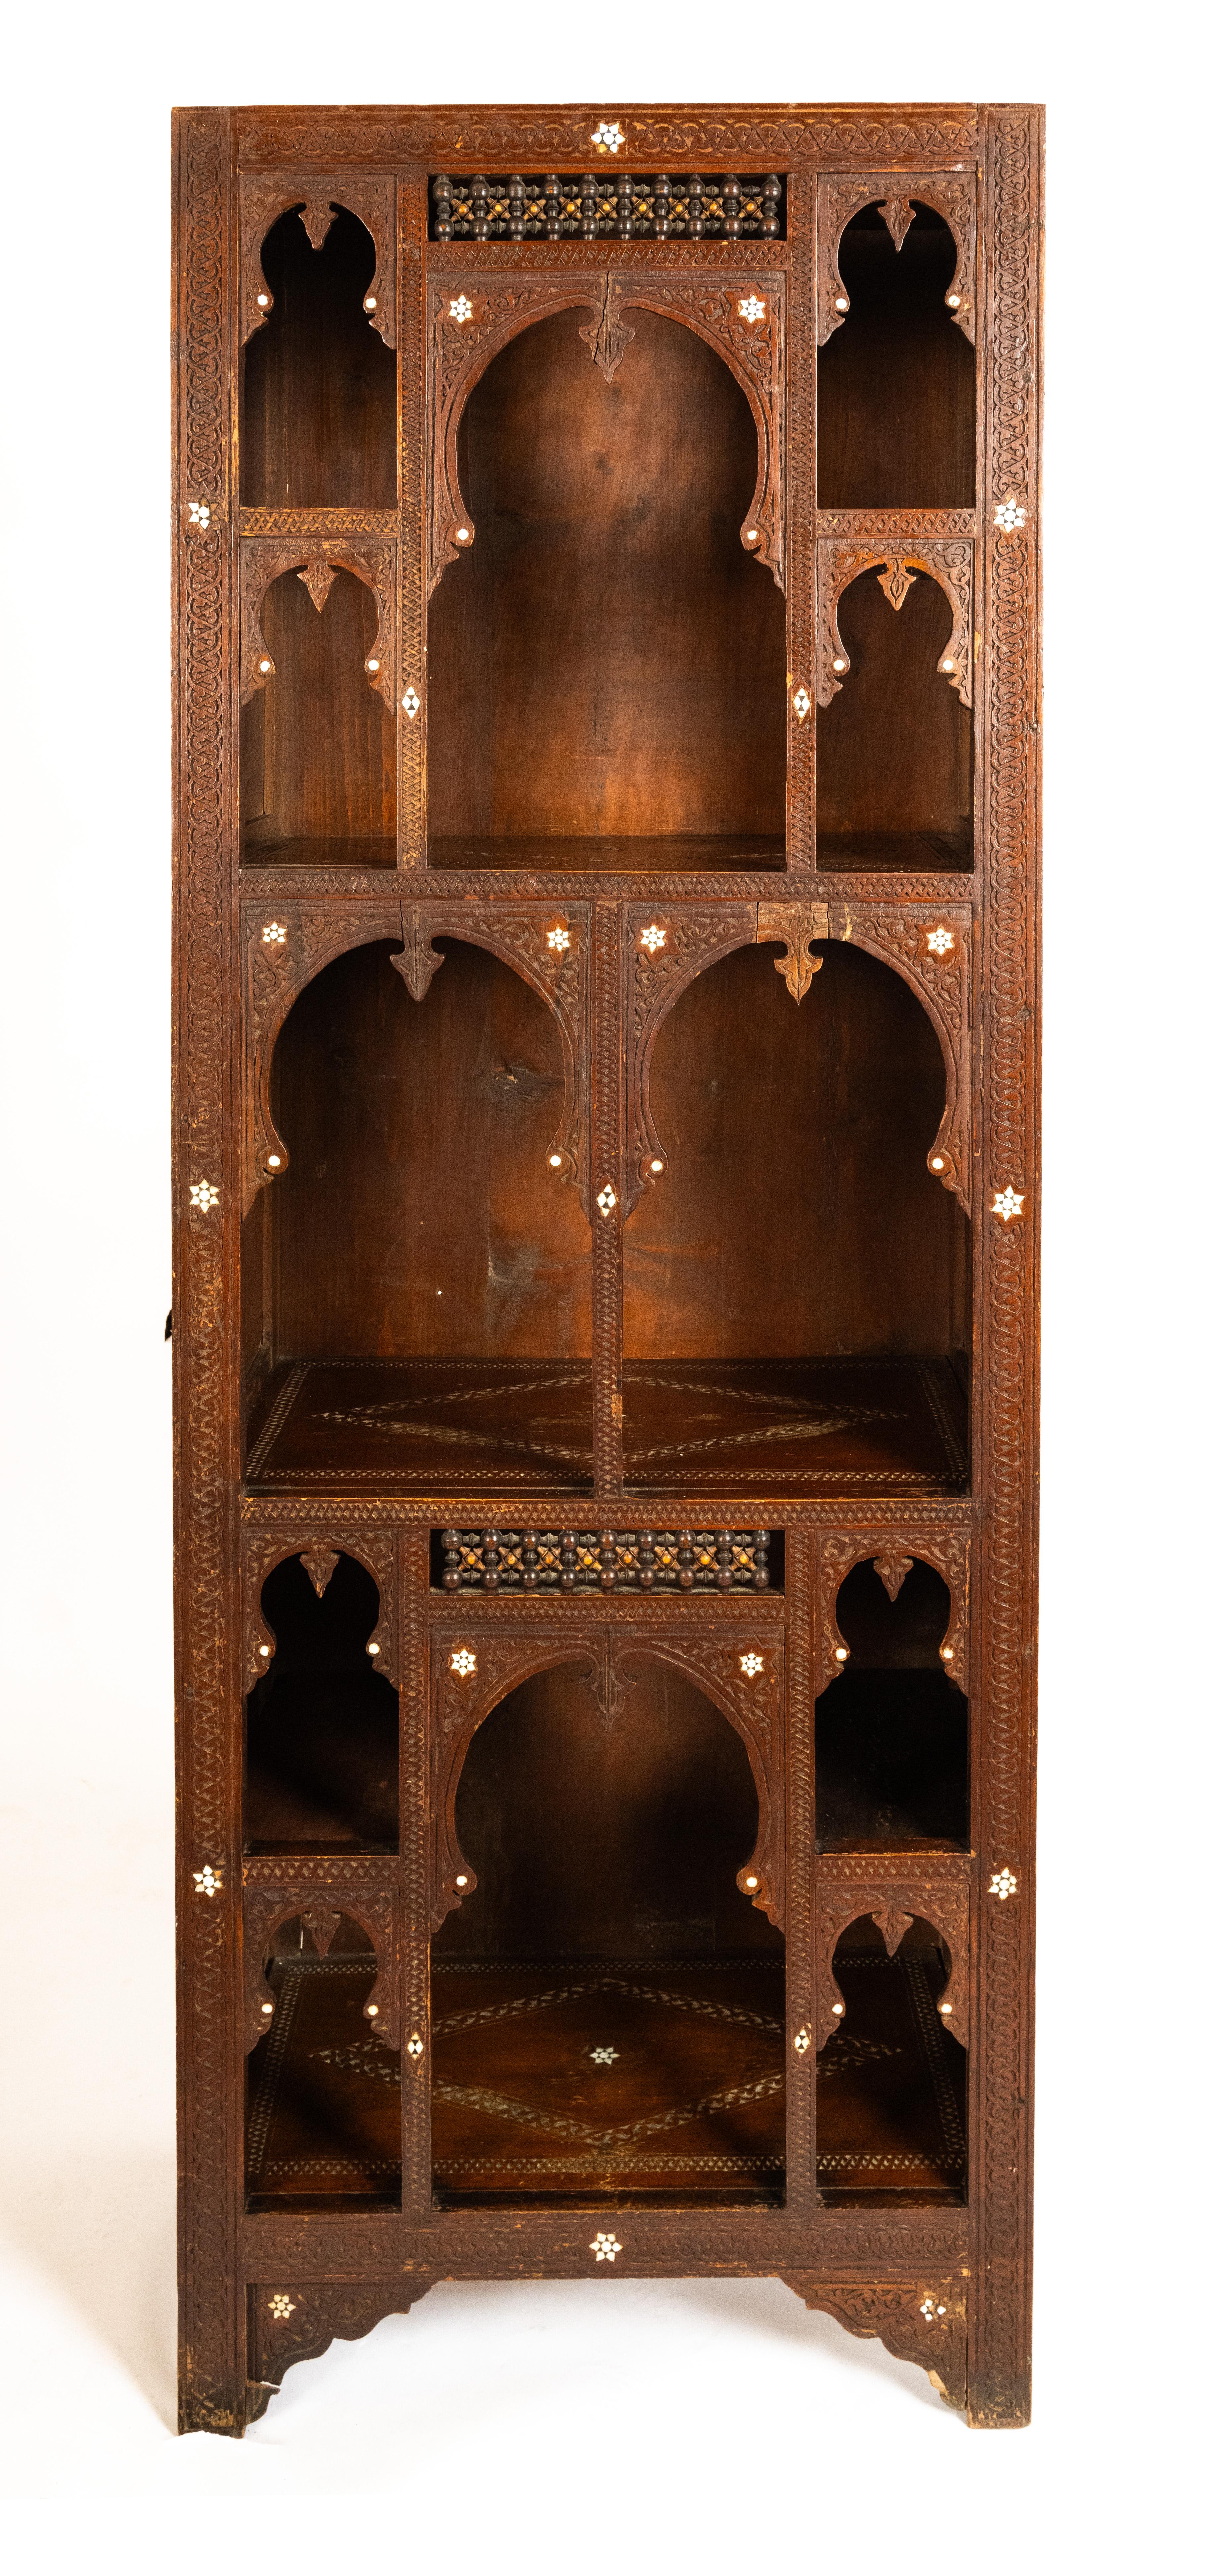 A free-standing vitrine of architectural form. With shelves of varying heights framed by Moorish arches having inlaid contrasting details. The rectangular frame with enclosed top, sides, and bottom are supported by bracket feet.